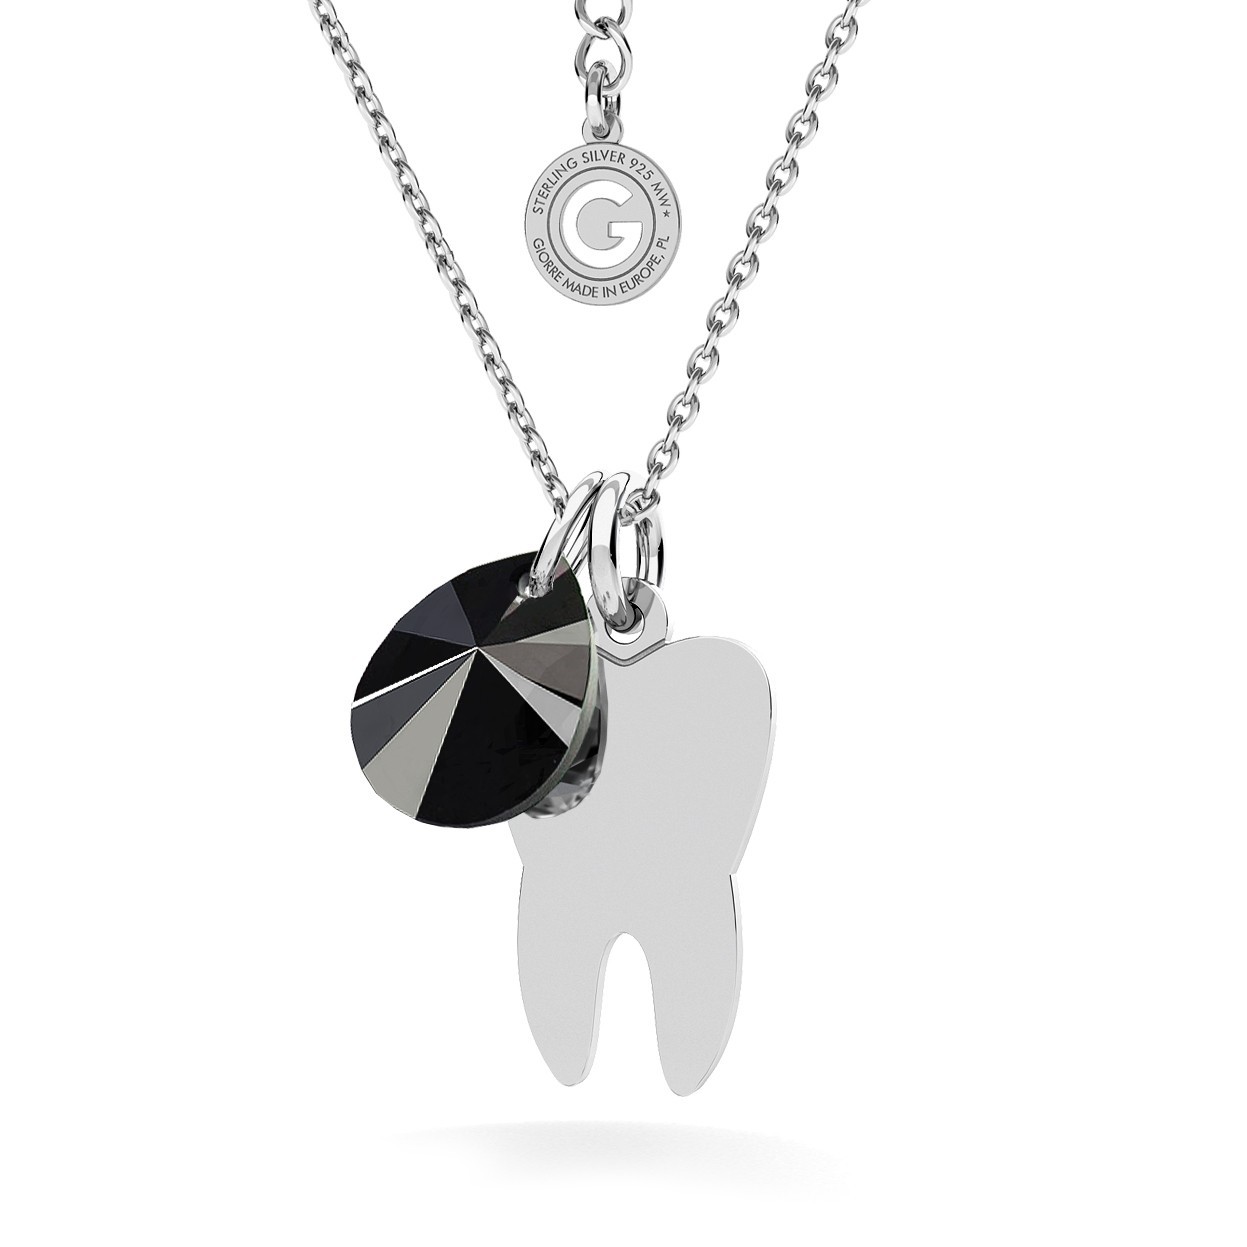 TOOTH NECKLACE, ENGRAVED AND SWAROVSKI CRYSTAL